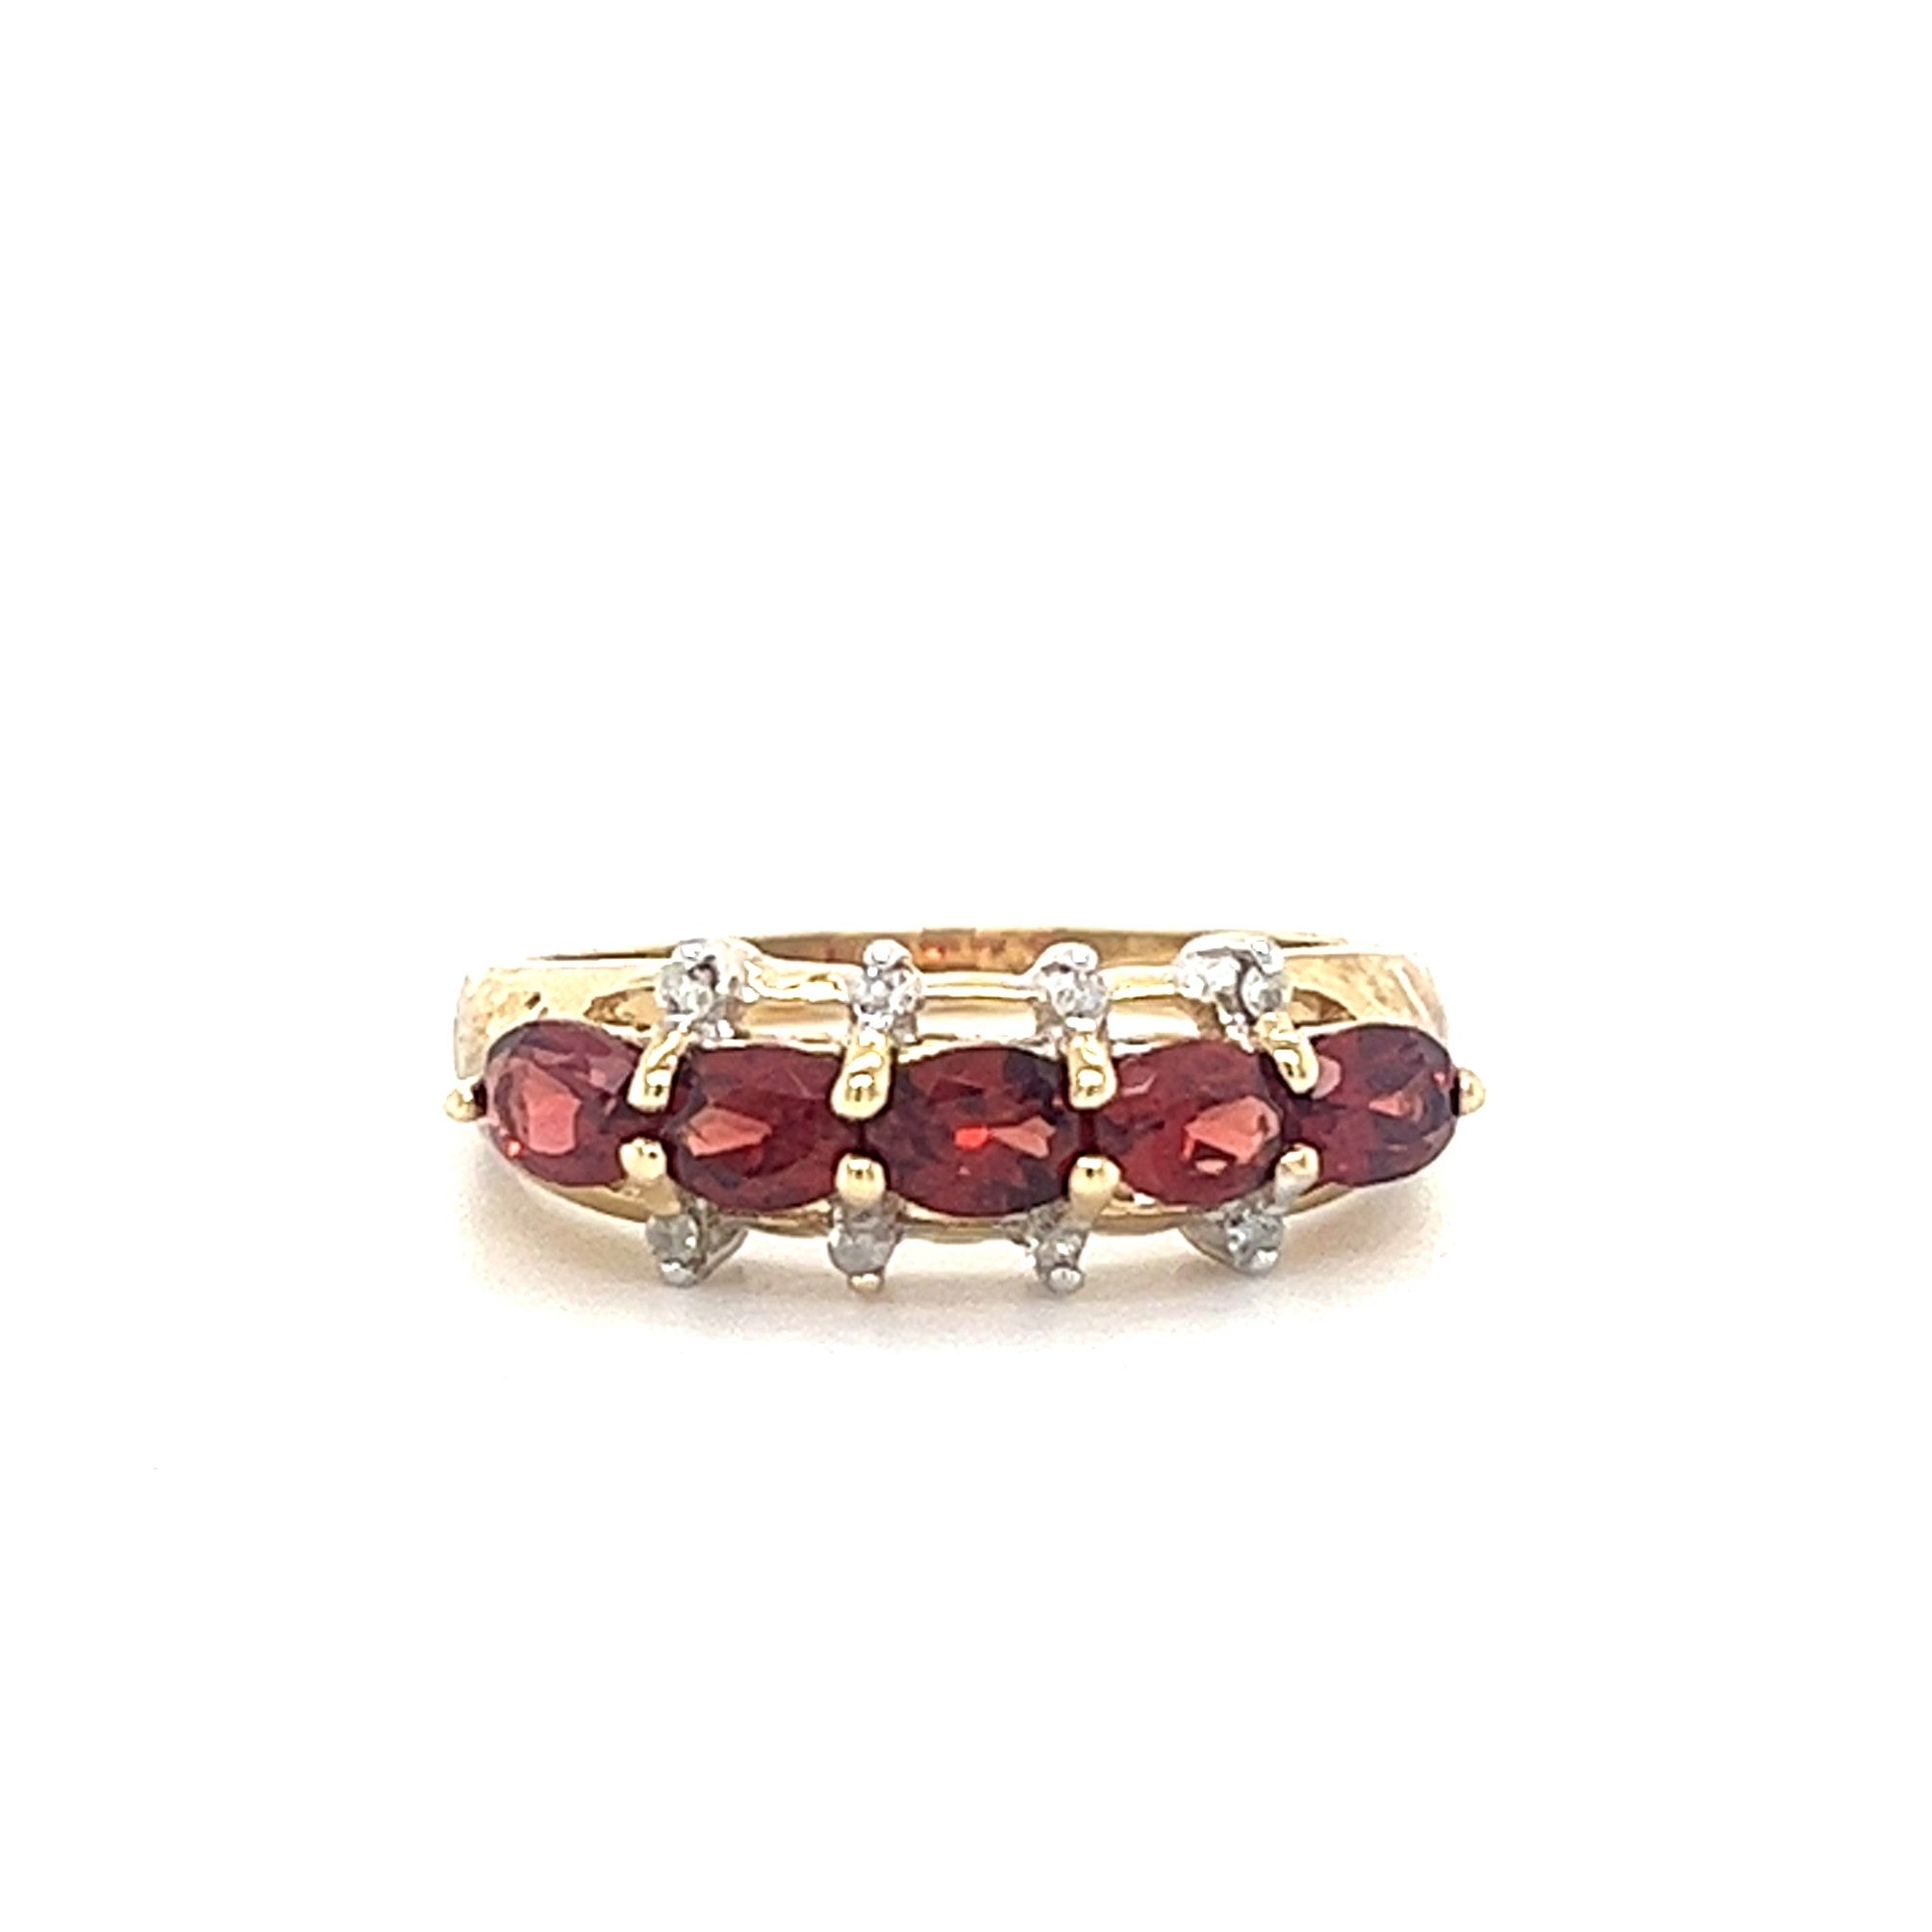 10KT YELLOW GOLD DIAMONDS AND COLOR STONE LADIES RING